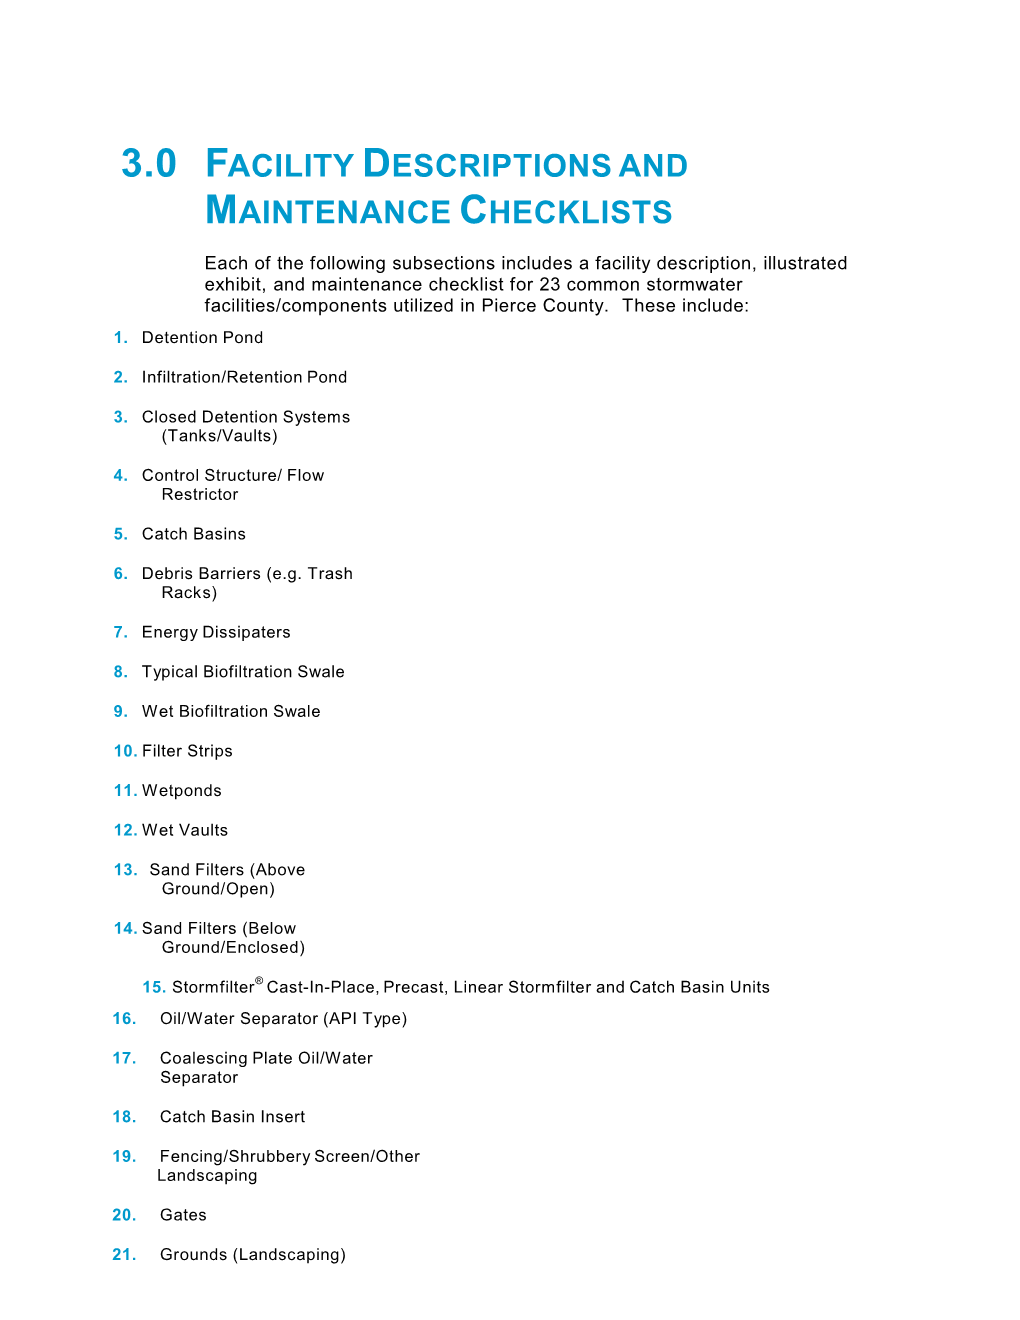 Stormwater Facility Descriptions and Maintenance Checklists